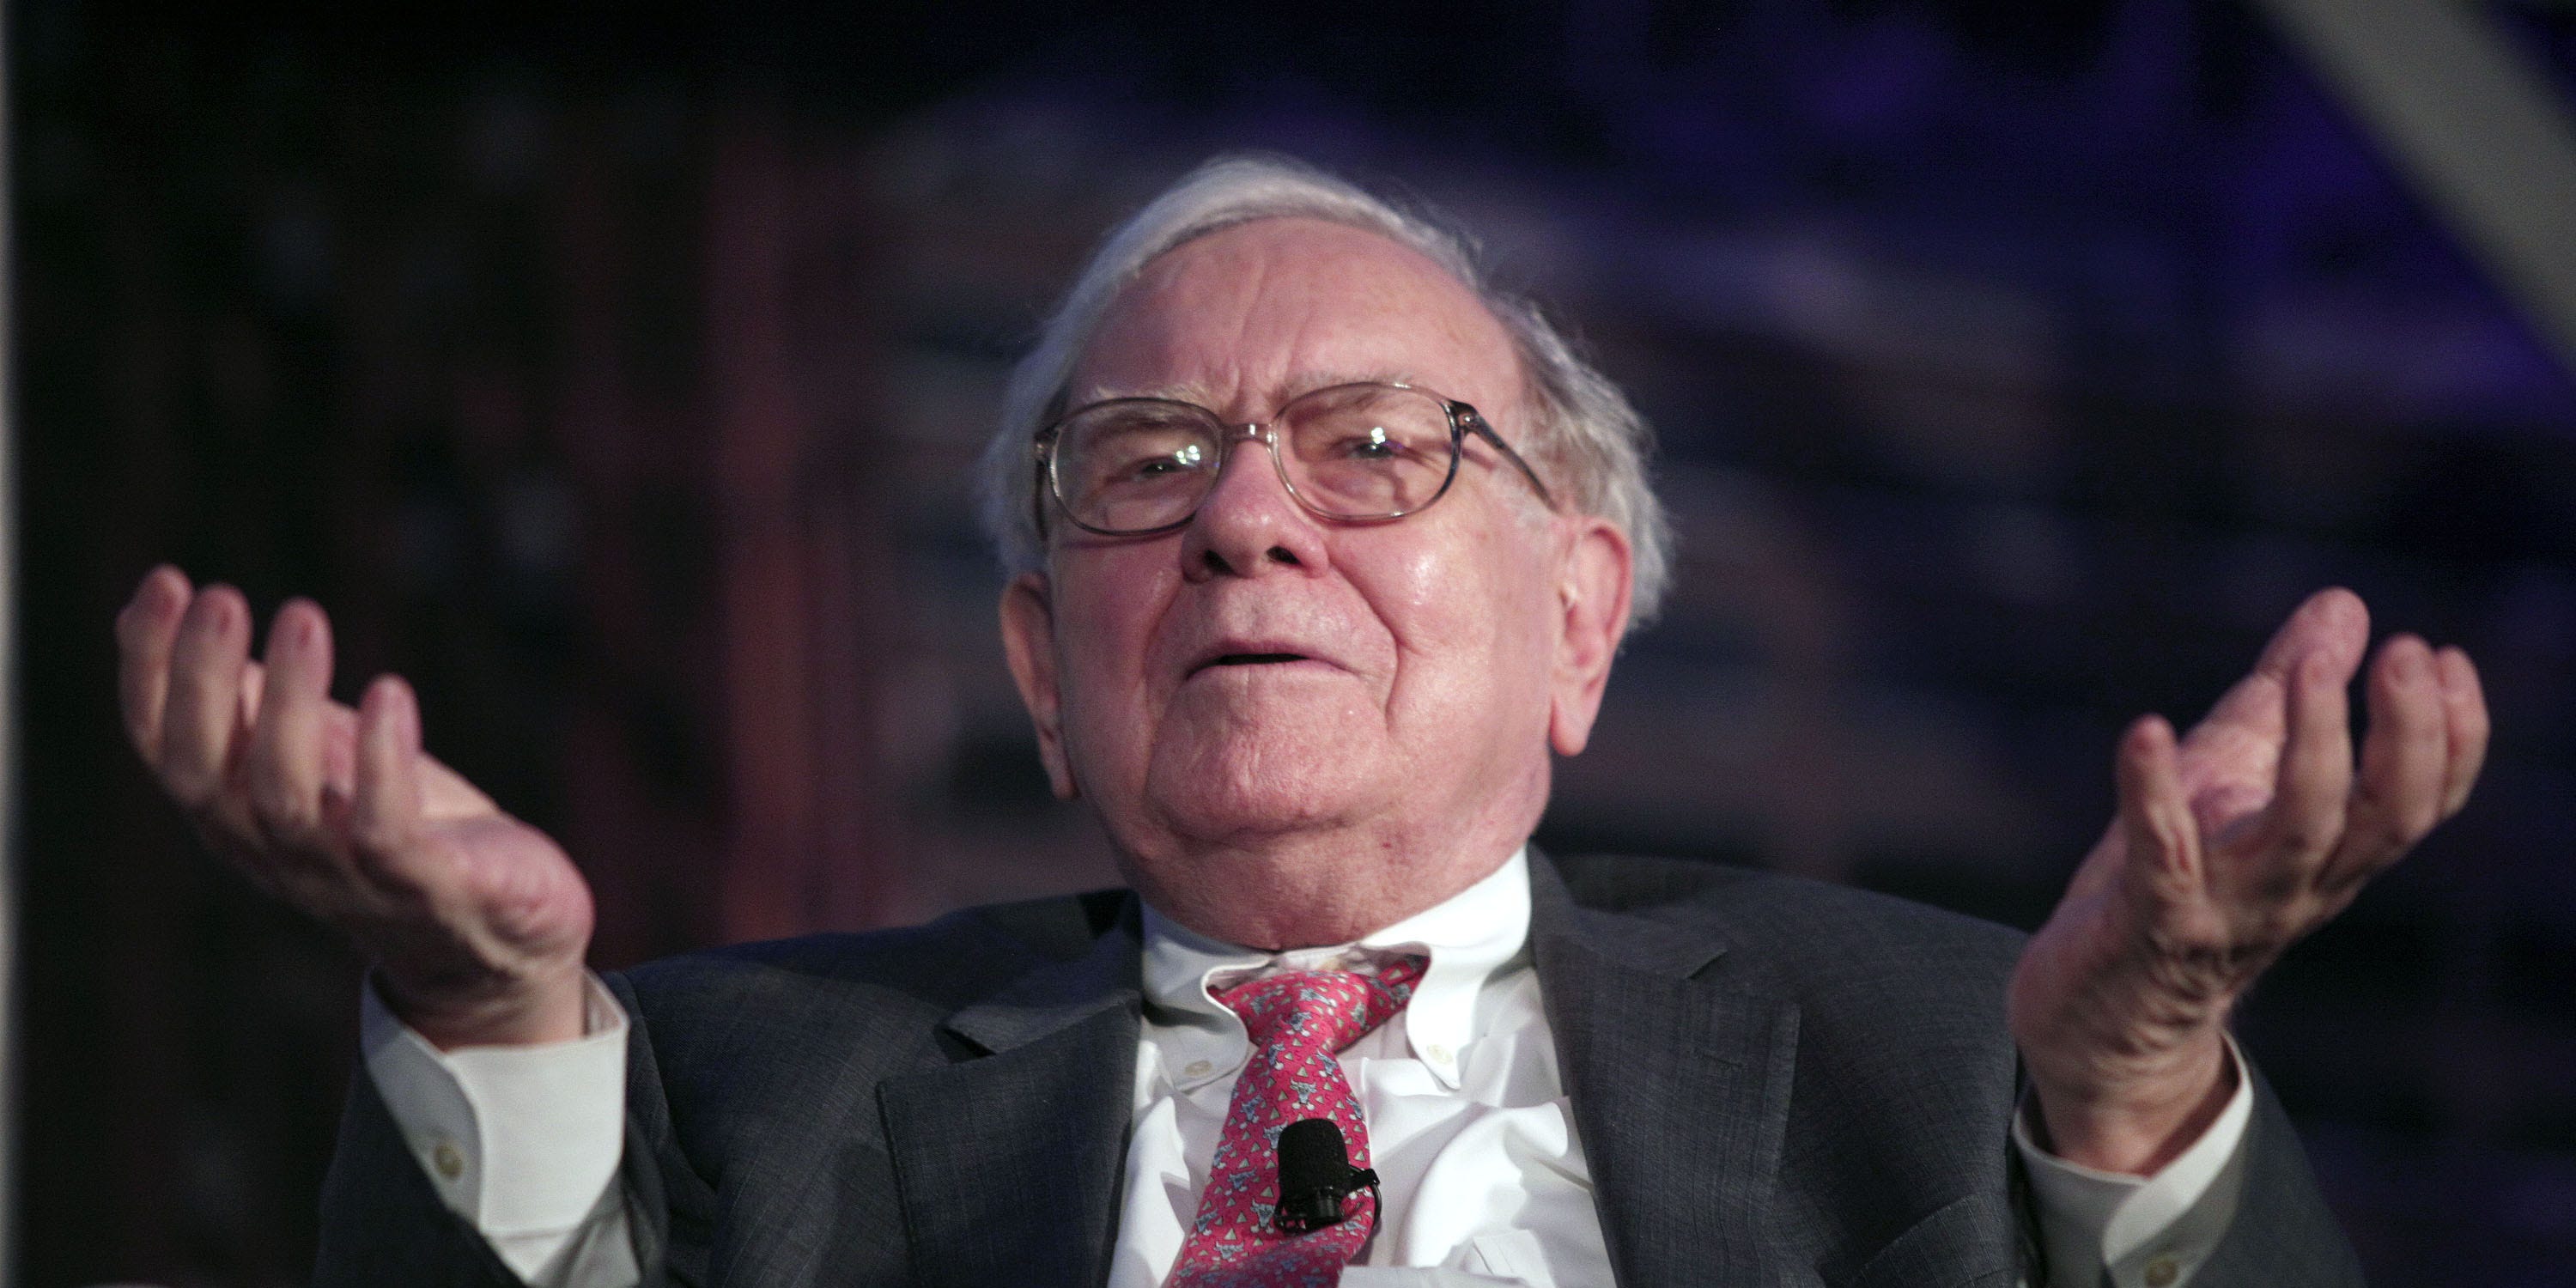 microsoft, why warren buffett only gets paid $100,000 a year — a fraction of his deputy's $20 million salary